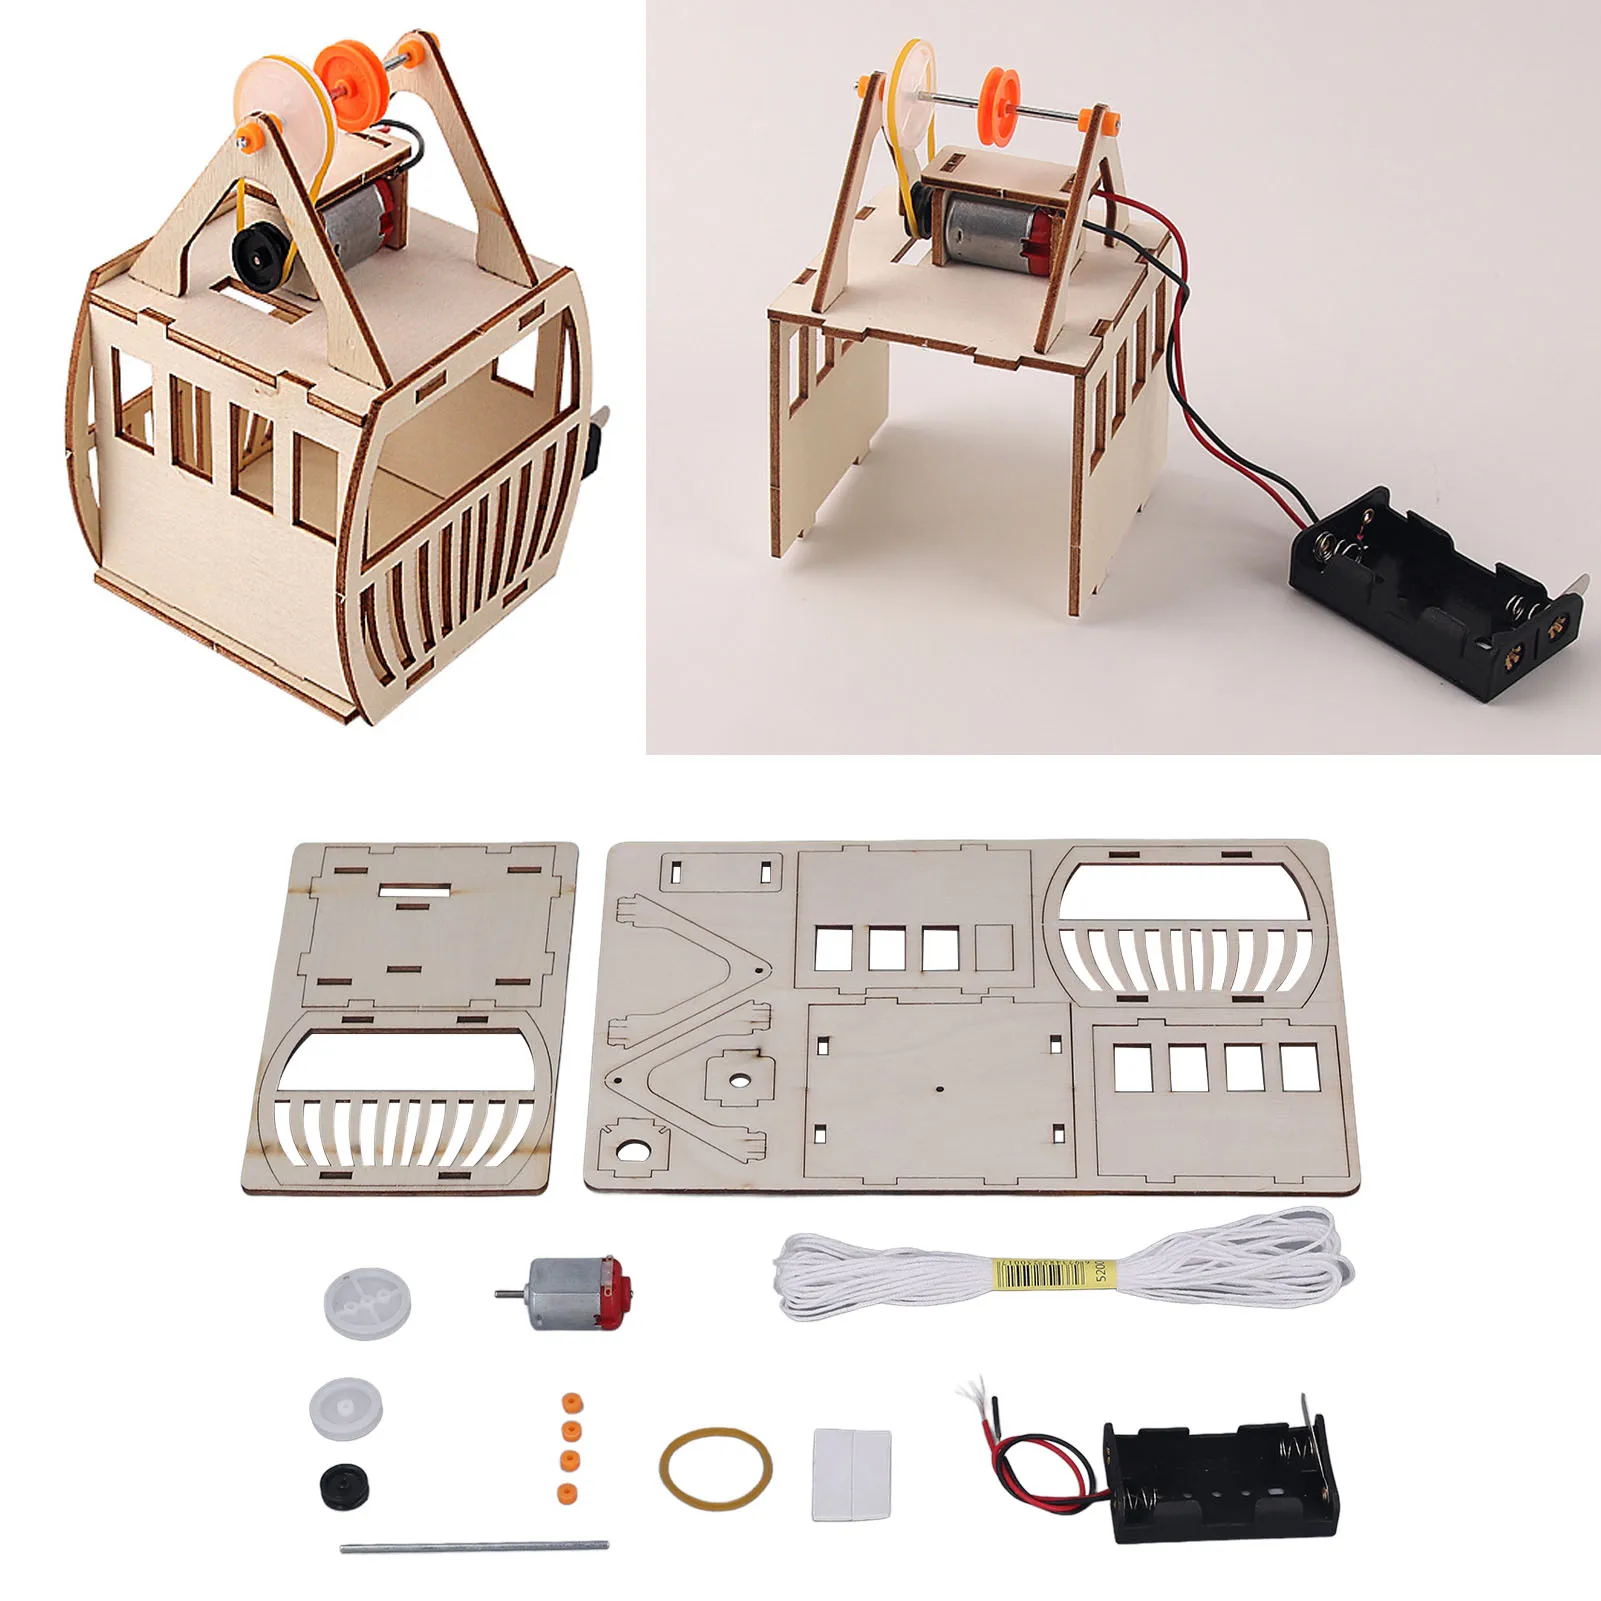 Diy wooden sightseeing cable car wooden science experiment toy kit for kids gifts thumb200